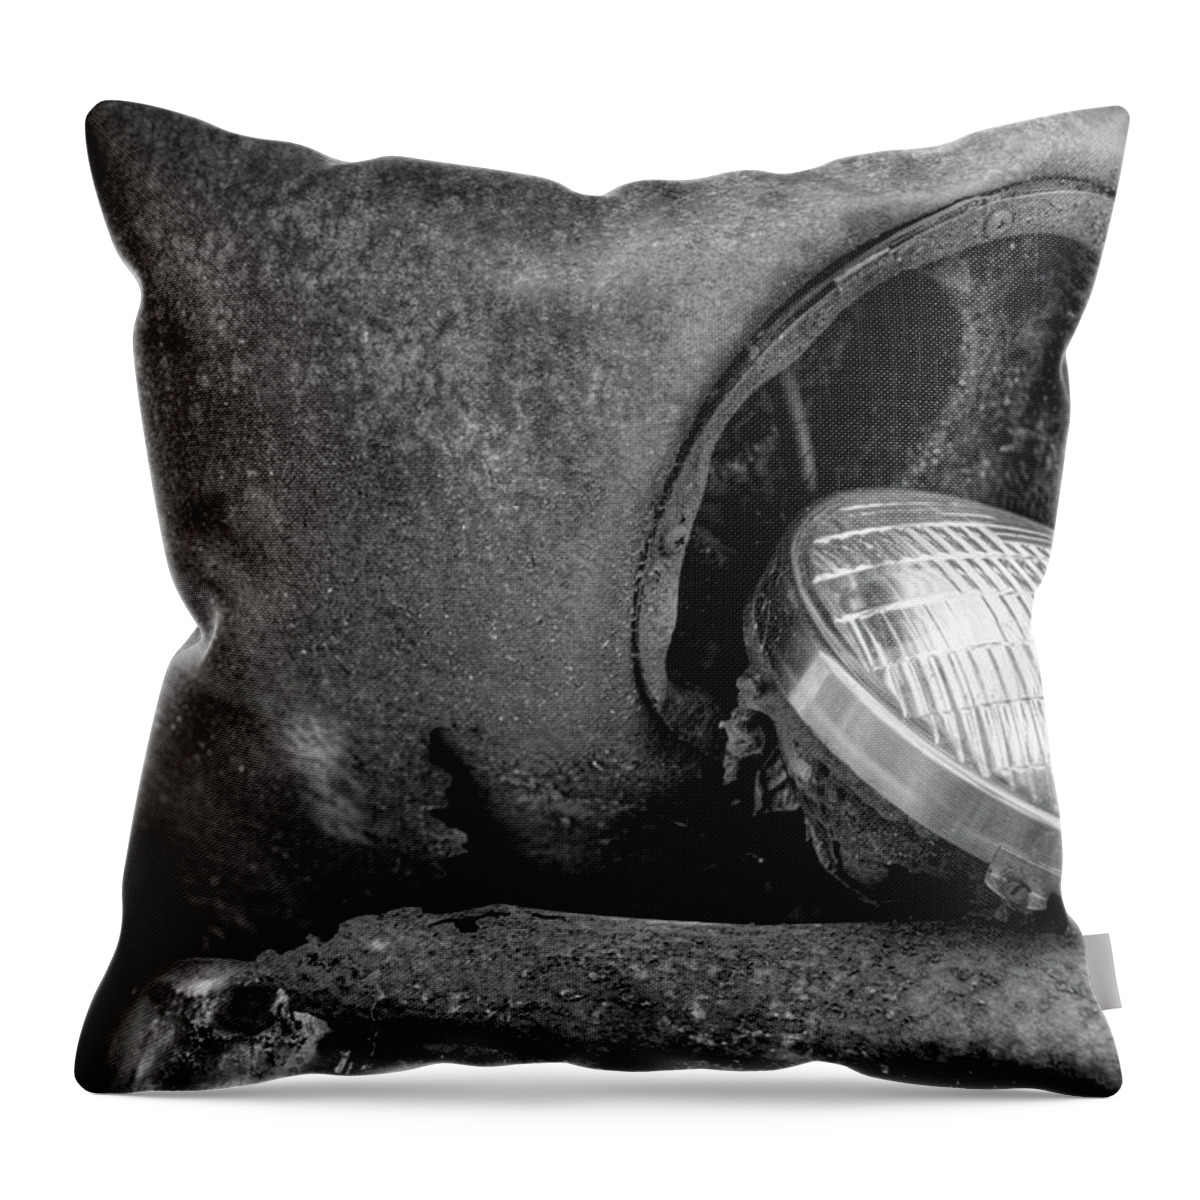 Automobile Throw Pillow featuring the photograph Resting Headlight of Rusty Car by Dennis Dame